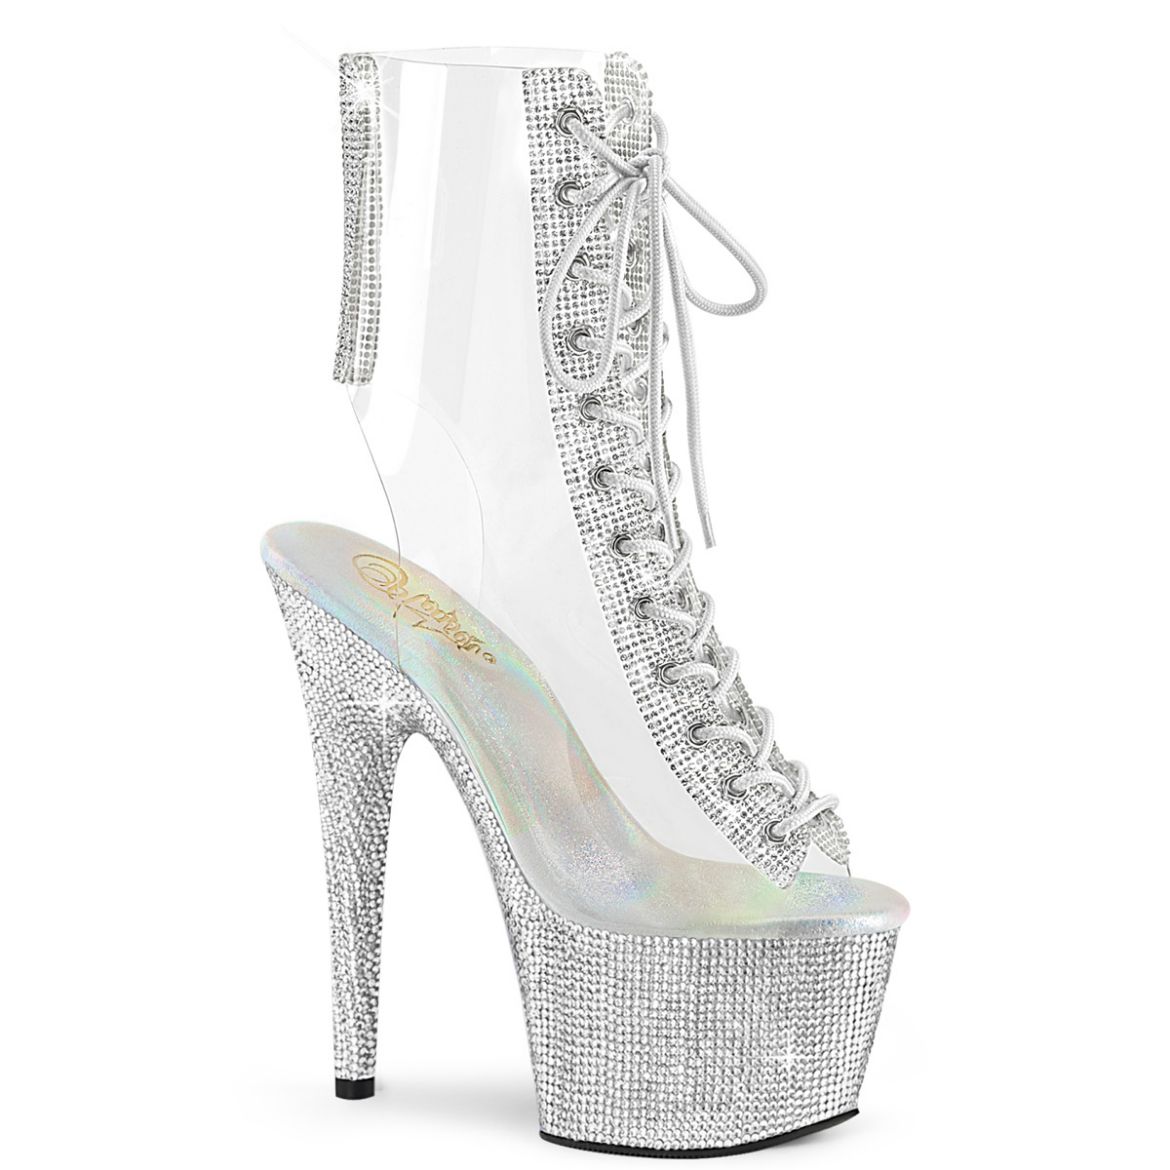 Product image of Pleaser BEJEWELED-1016C-2-7 Clr-RS/Slv RS 7 Inch Heel 2 3/4 Inch PF Open Toe/Heel Lace-Up Ankle Boot w/RS